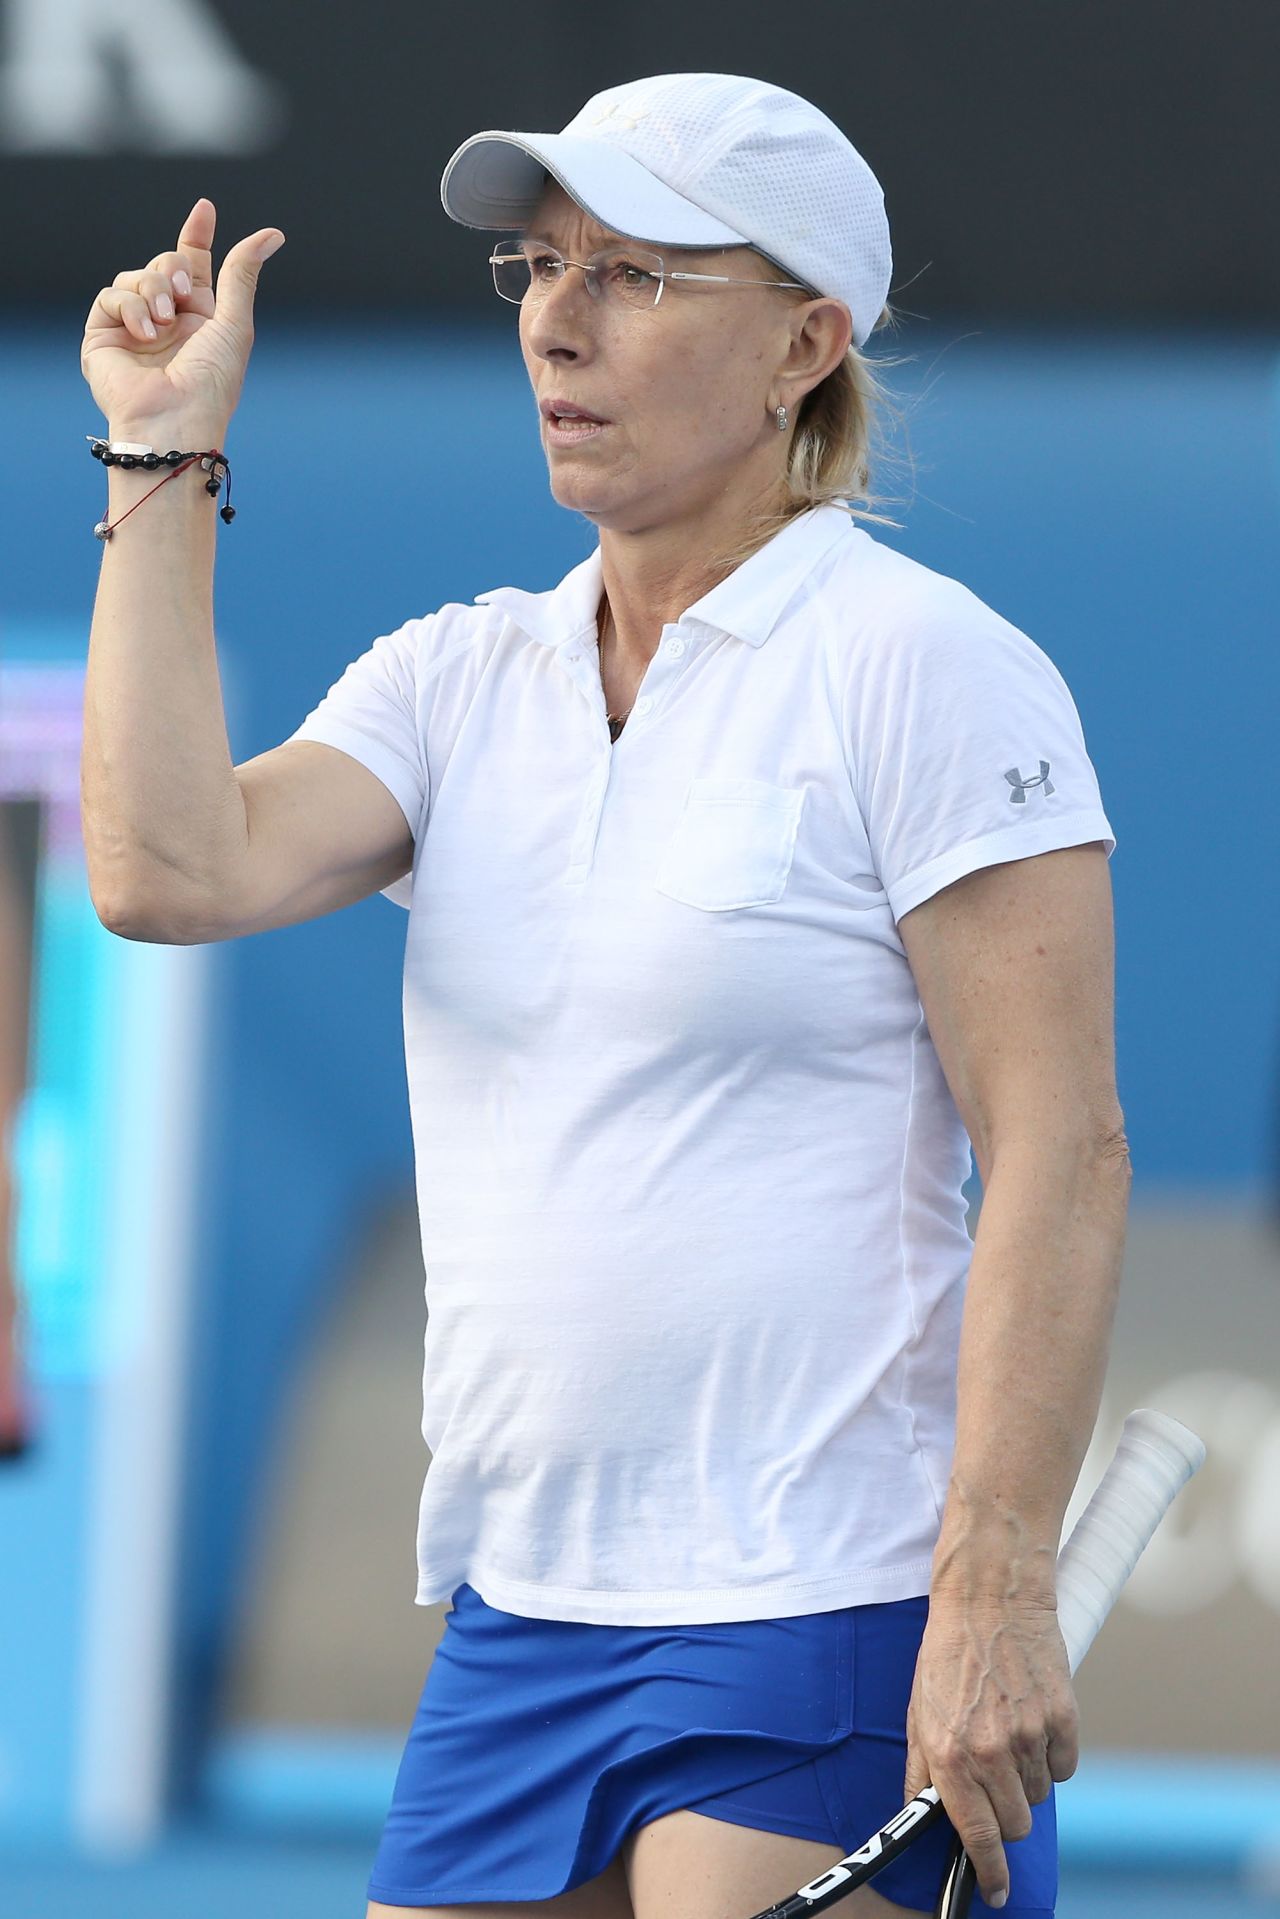 Martina Navratilova, who holds the Open Era record for total singles and doubles titles in the men's and women's game, coached Agnieszka Radwanska for a few months before they split in April 2015. The Pole won the season-ending WTA Finals in Singapore in November -- her biggest career title to date.